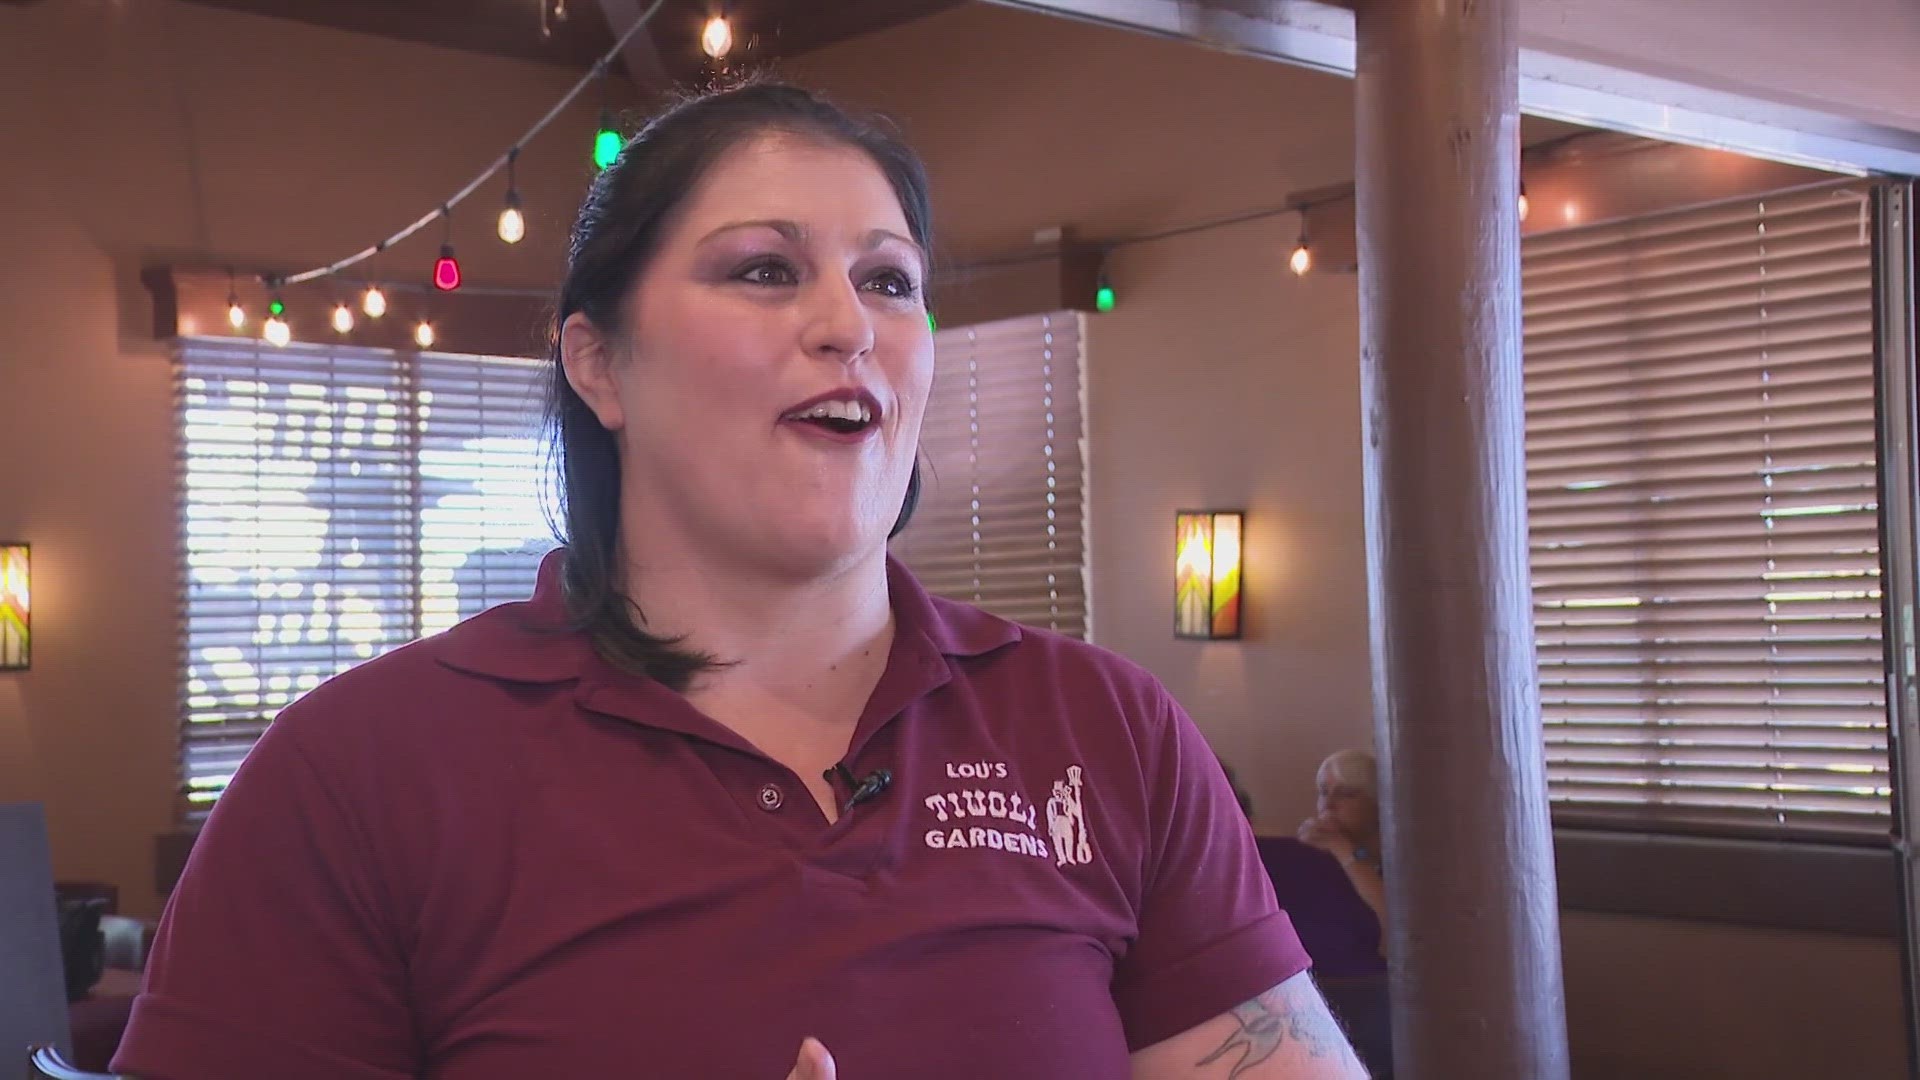 Gina Costarella is a server in Surprise who goes above and beyond to help her customers.